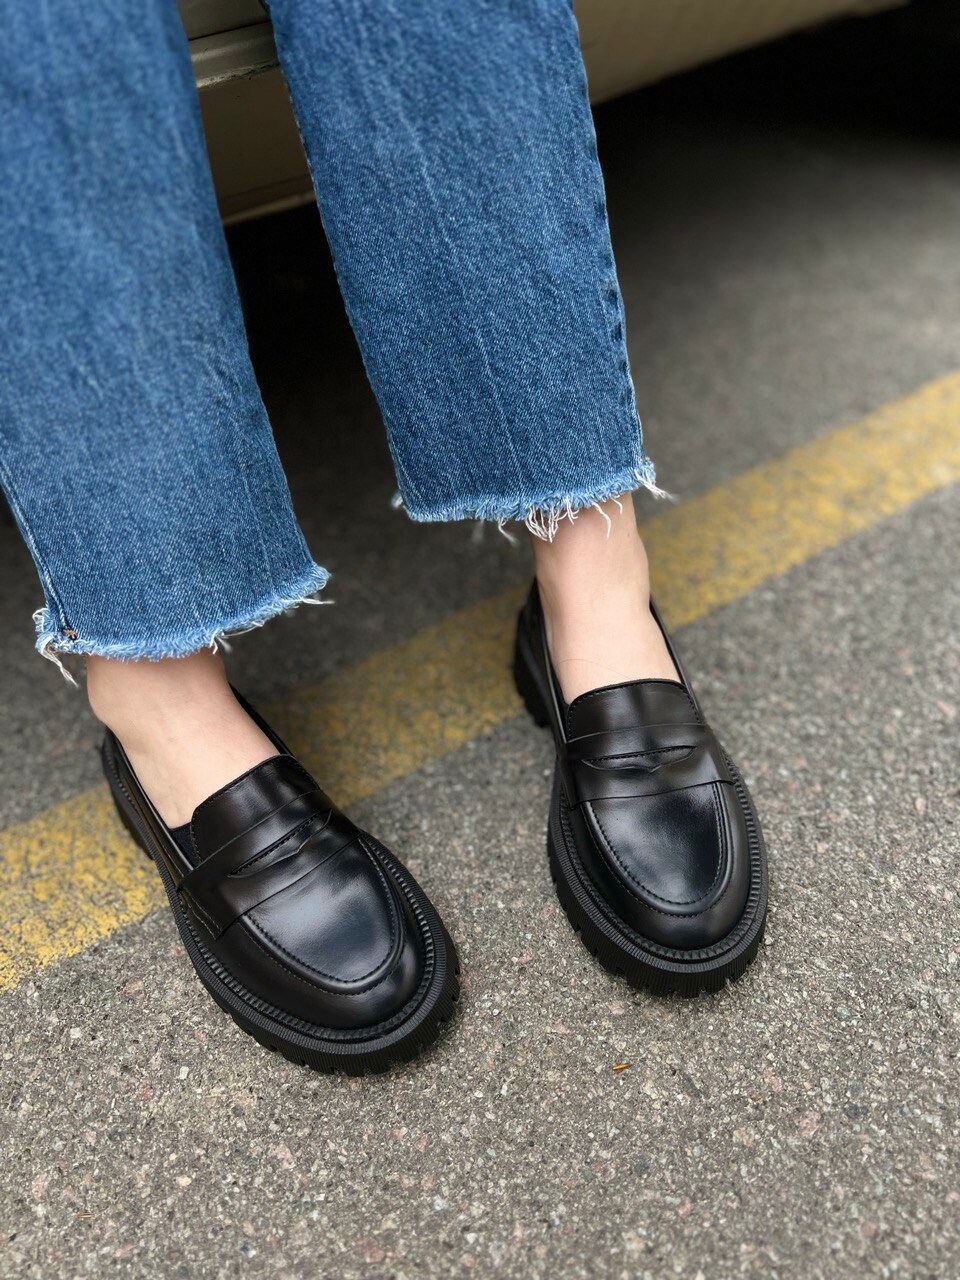 Loafers, Womens Loafers, Leather Shoes, Womens Shoes, Shoes Women